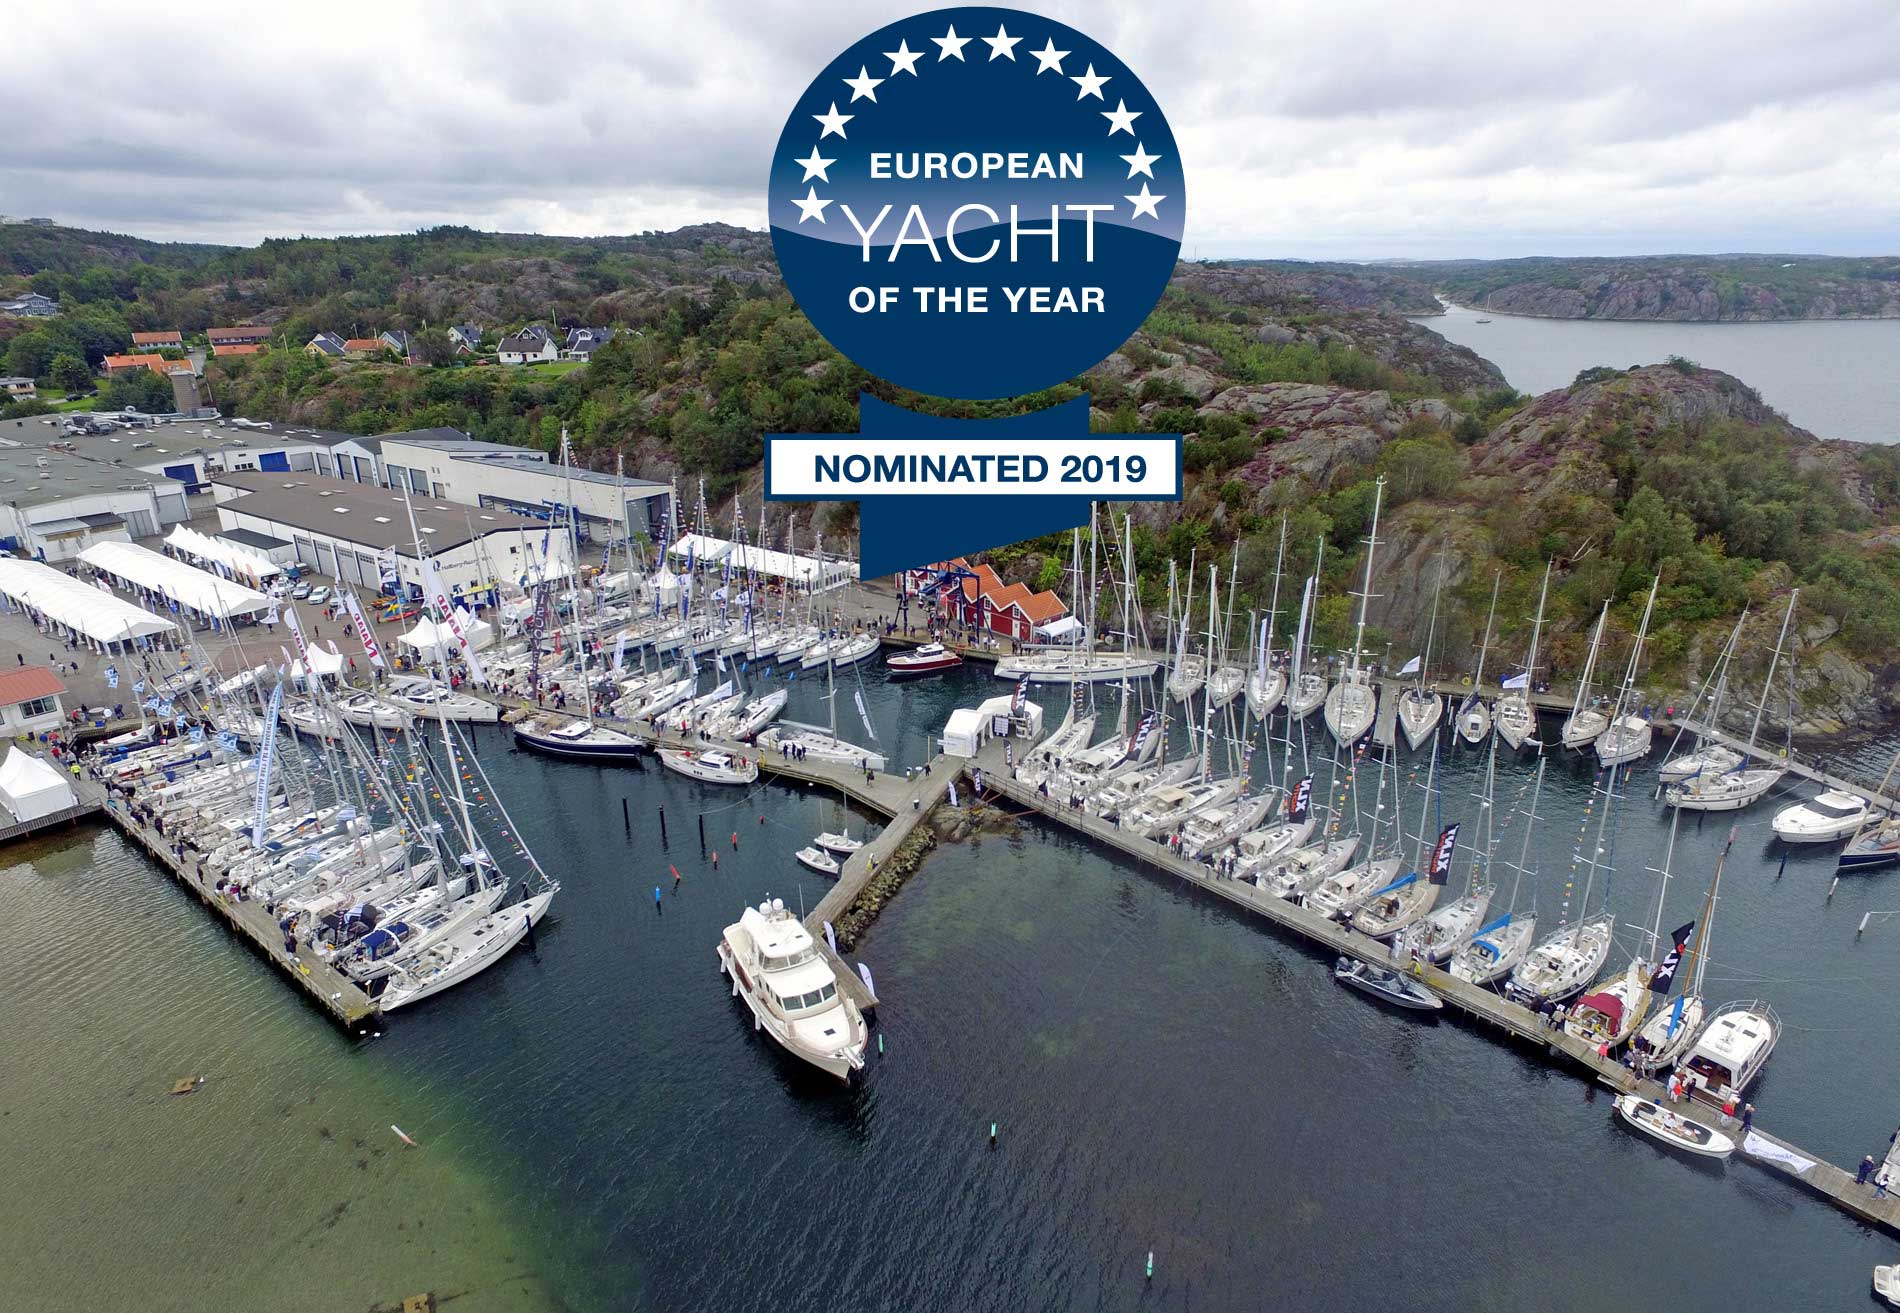 Open Yard center for European Yacht of the Year